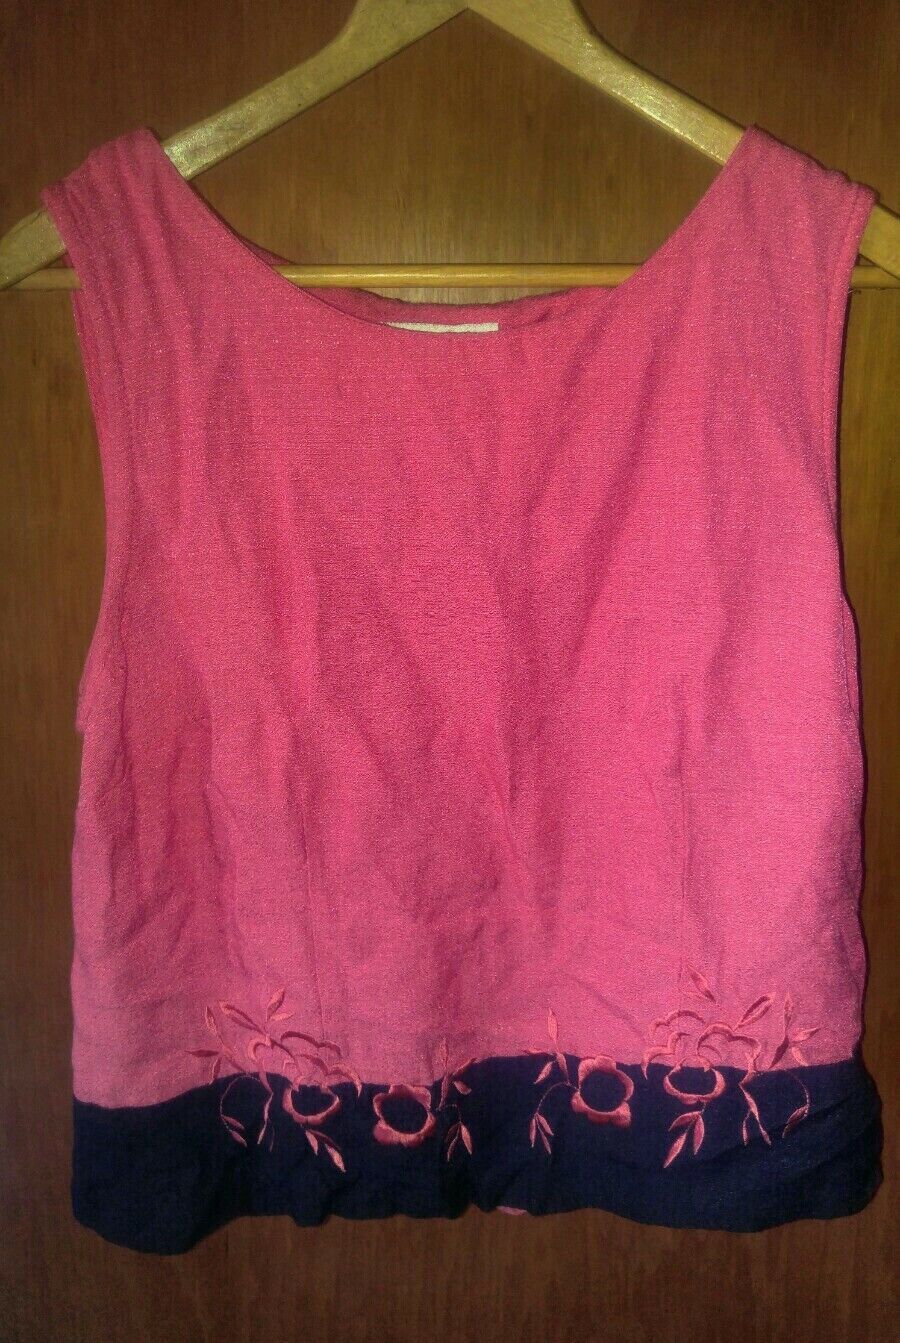 Primary image for Womens Pride& Joy Size 16 Sleeveless Pink Top Black & Floral Bottom